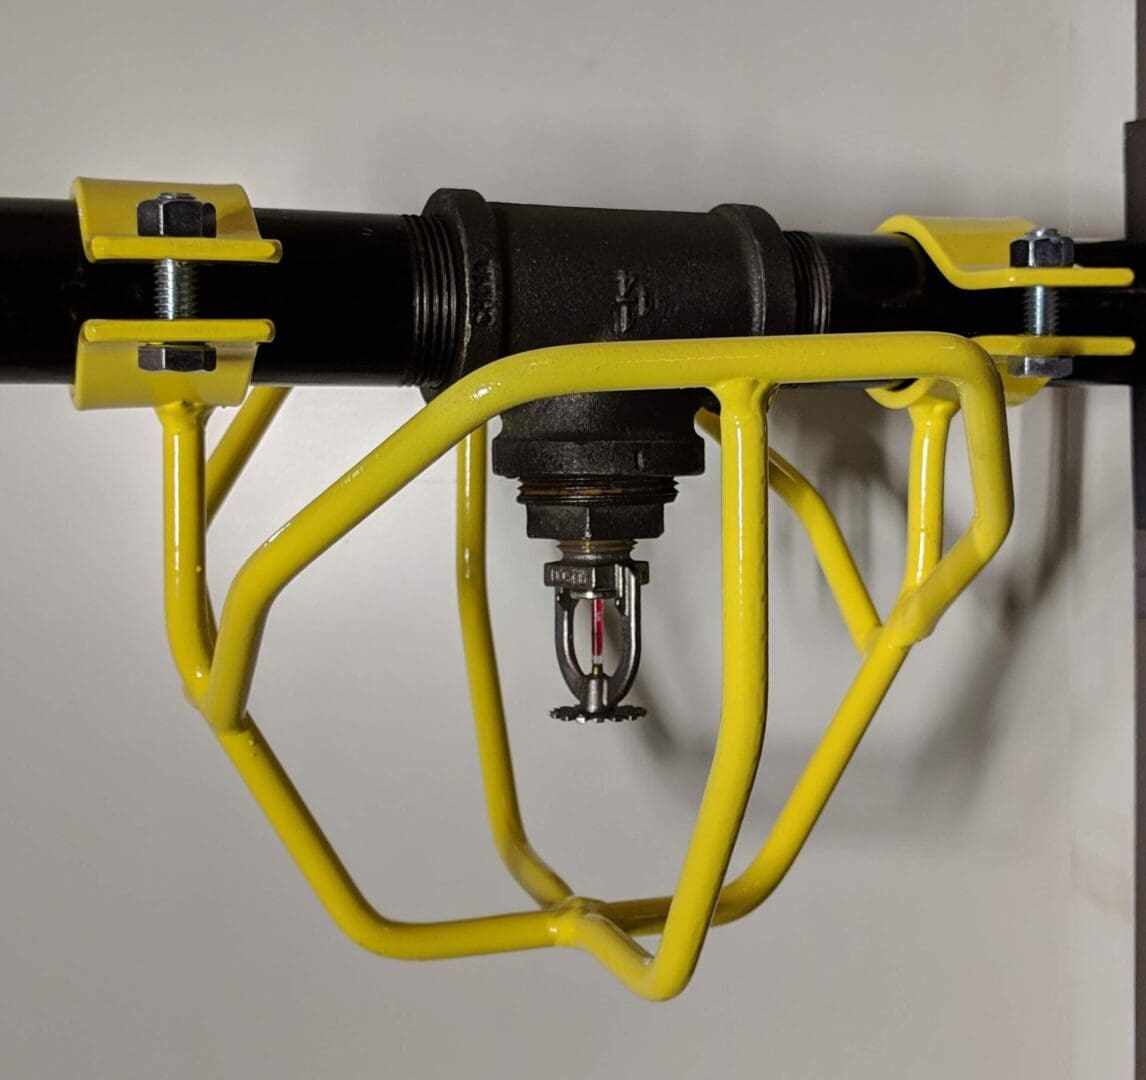 Yellow metal bracket mounted on a black pipe, securing a black and red electrical component.